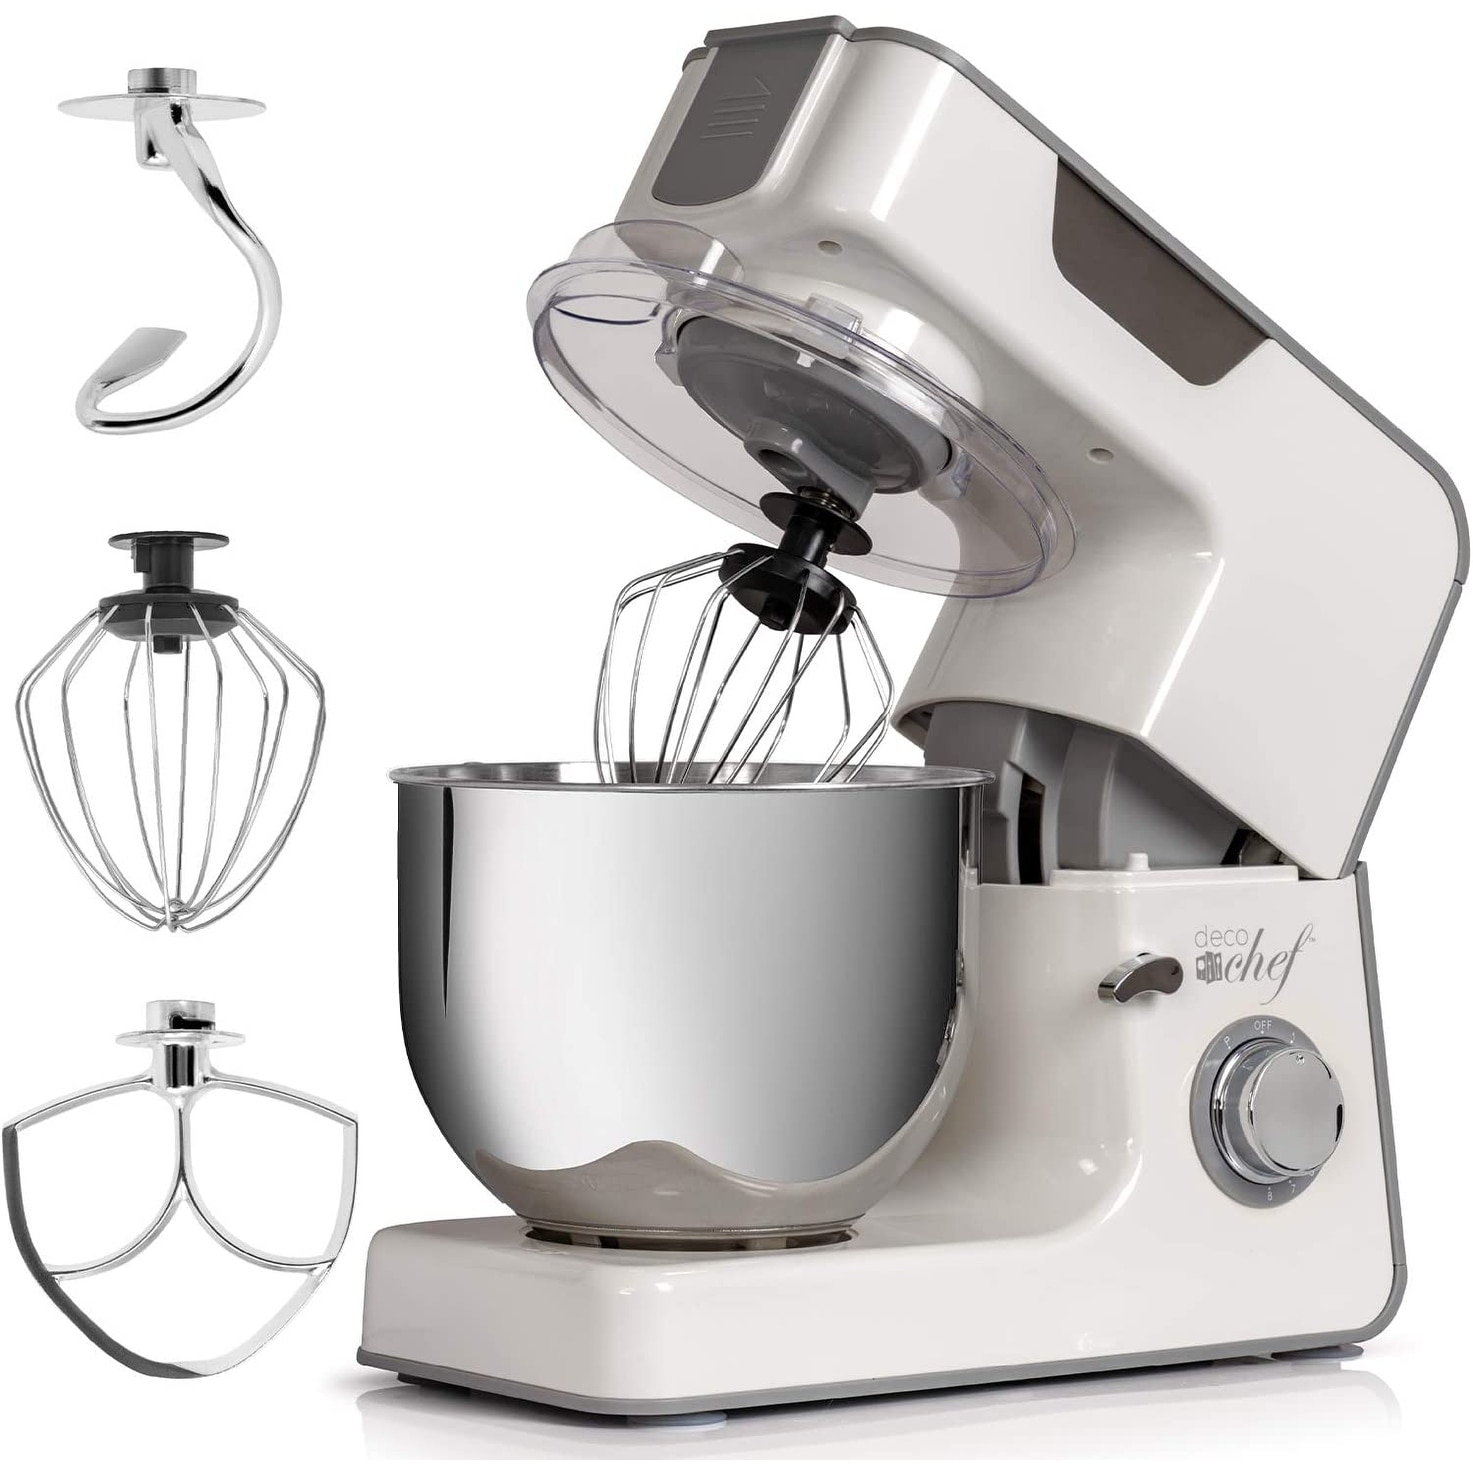 5.5 QT Kitchen Stand Mixer, 550W 8-Speed Motor with Pulse Functionality, includes Dough Hook, Flat Beater